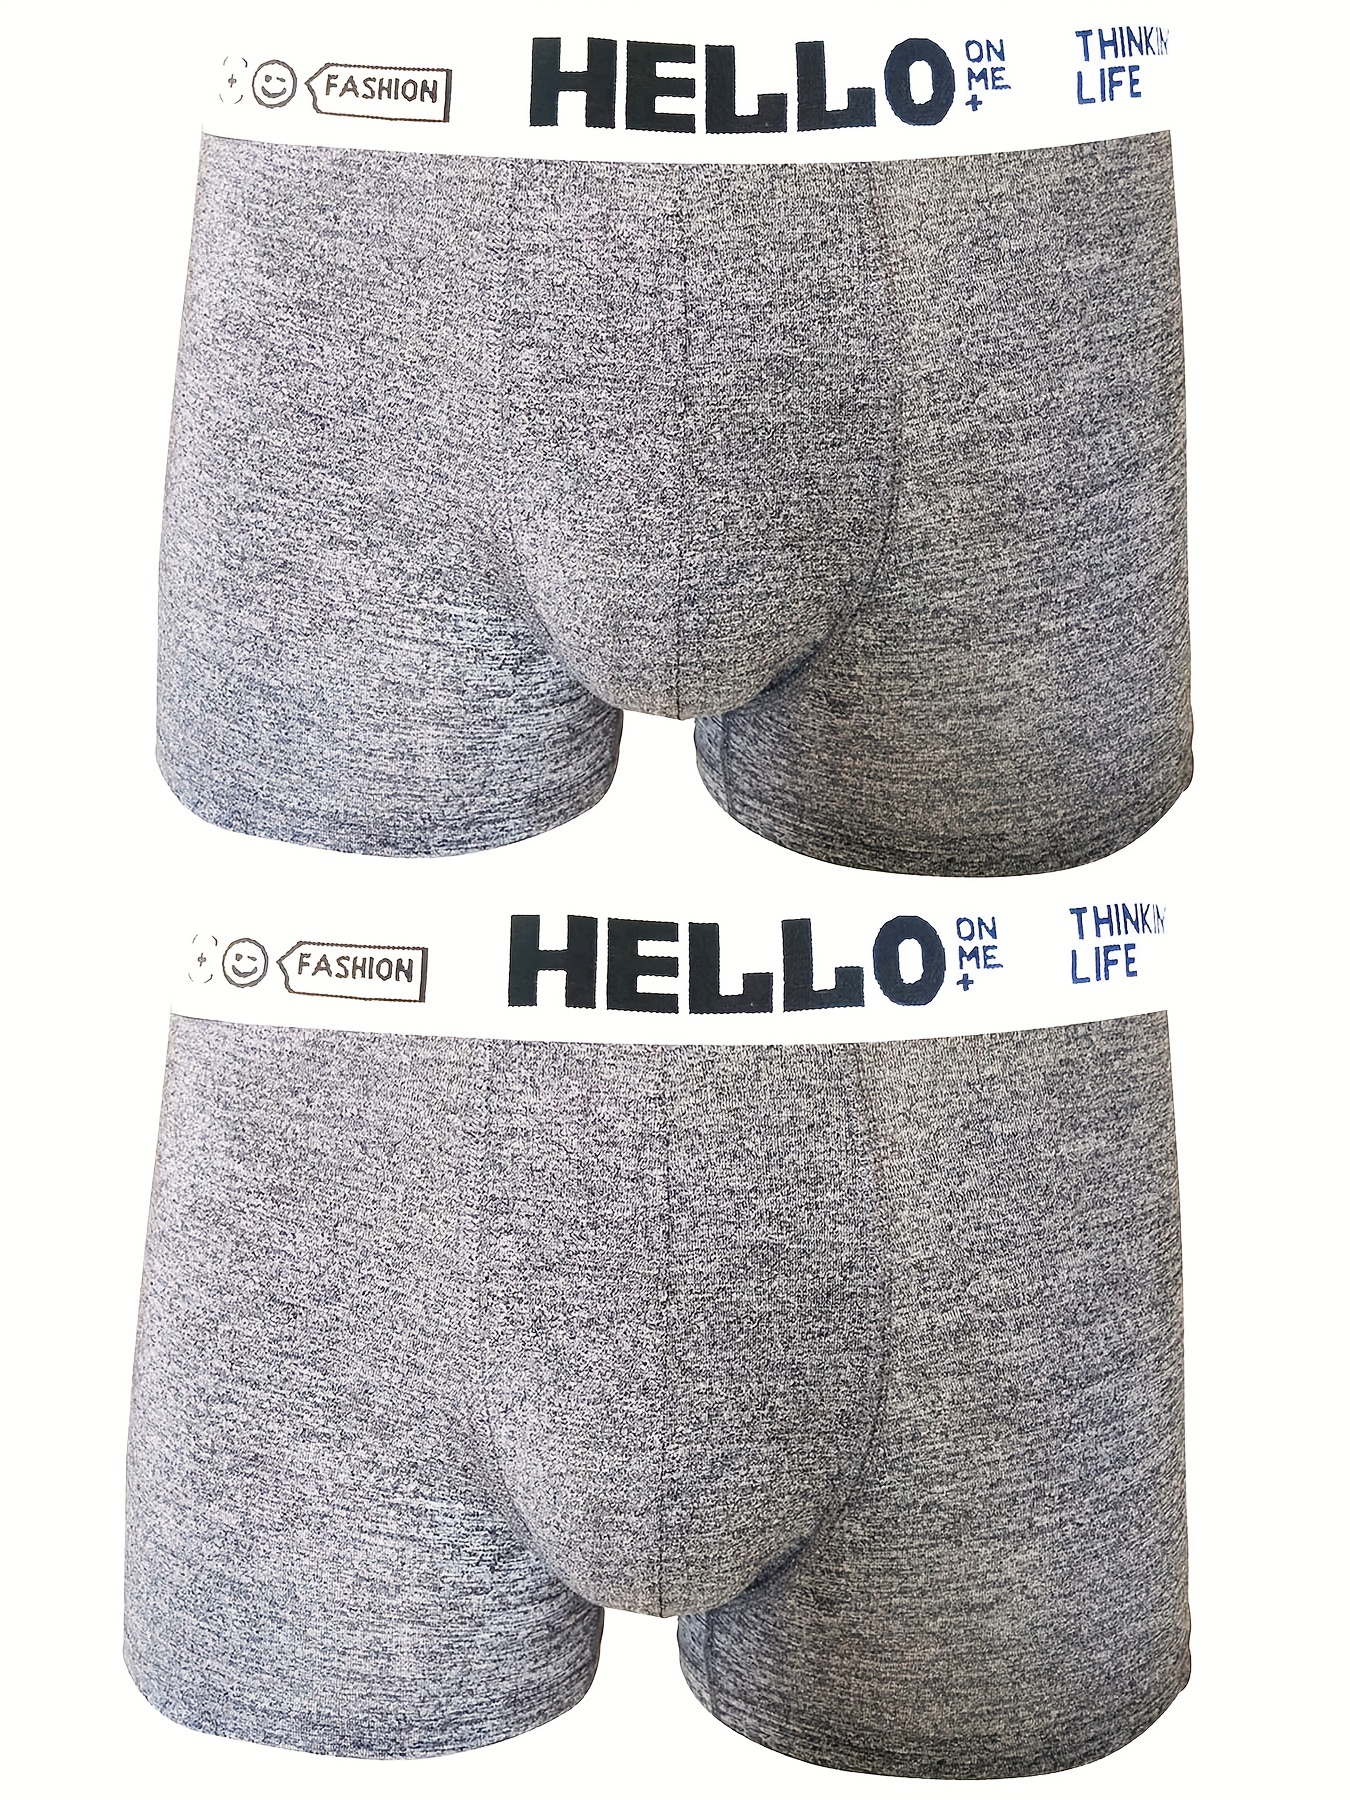 Hello Big Boy. Charlie's NEW Magnum Underwear is Available Now